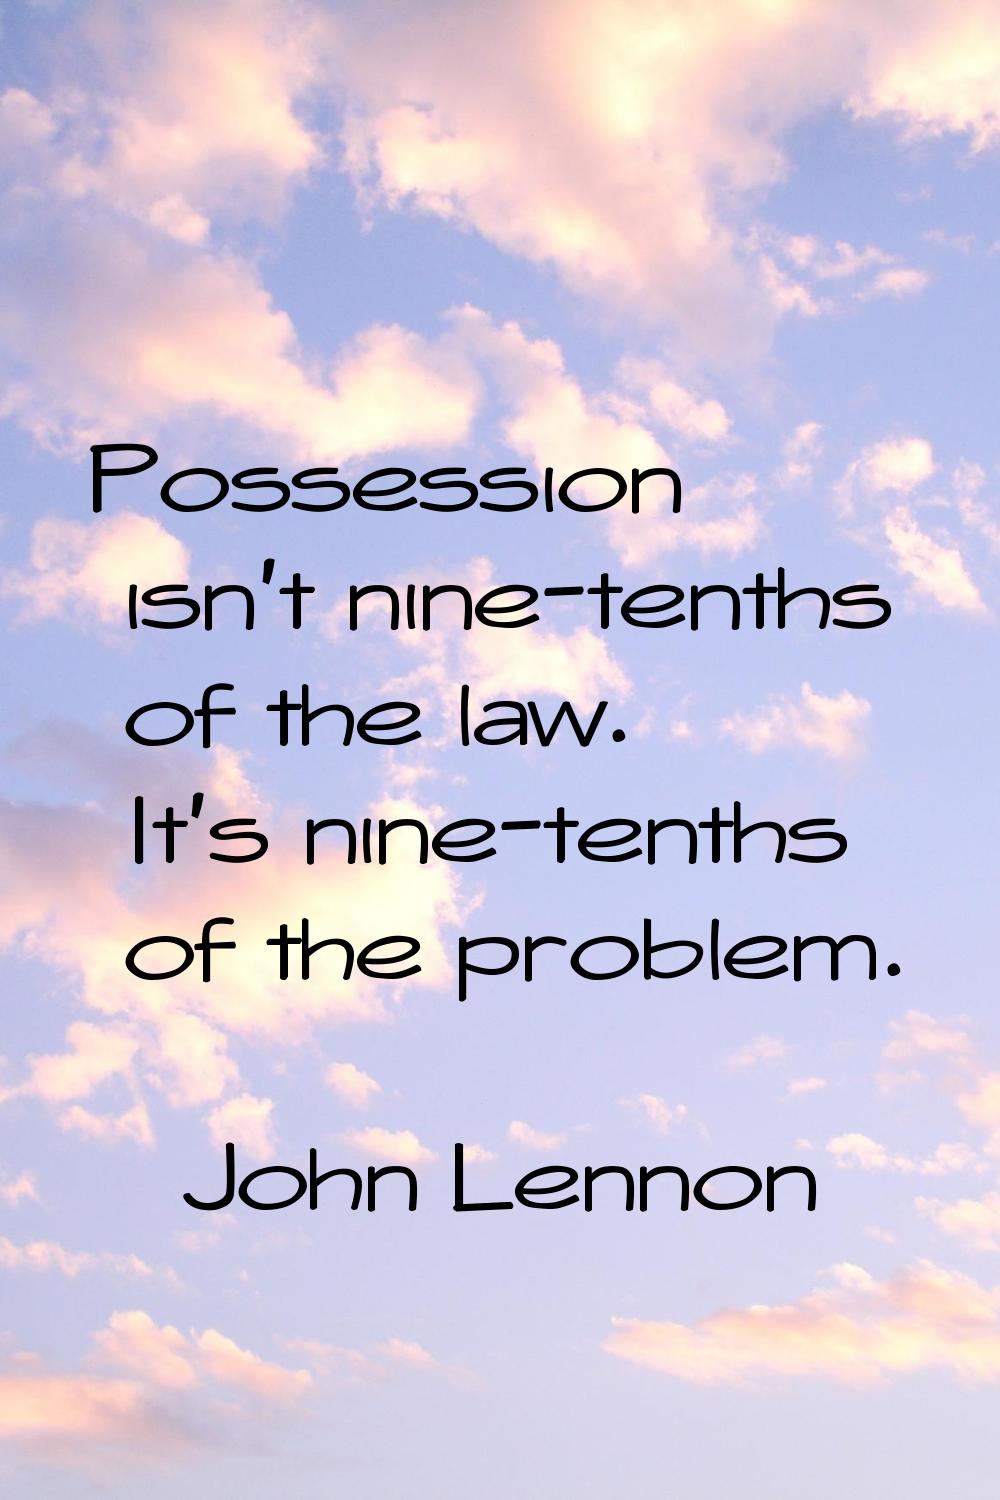 Possession isn't nine-tenths of the law. It's nine-tenths of the problem.